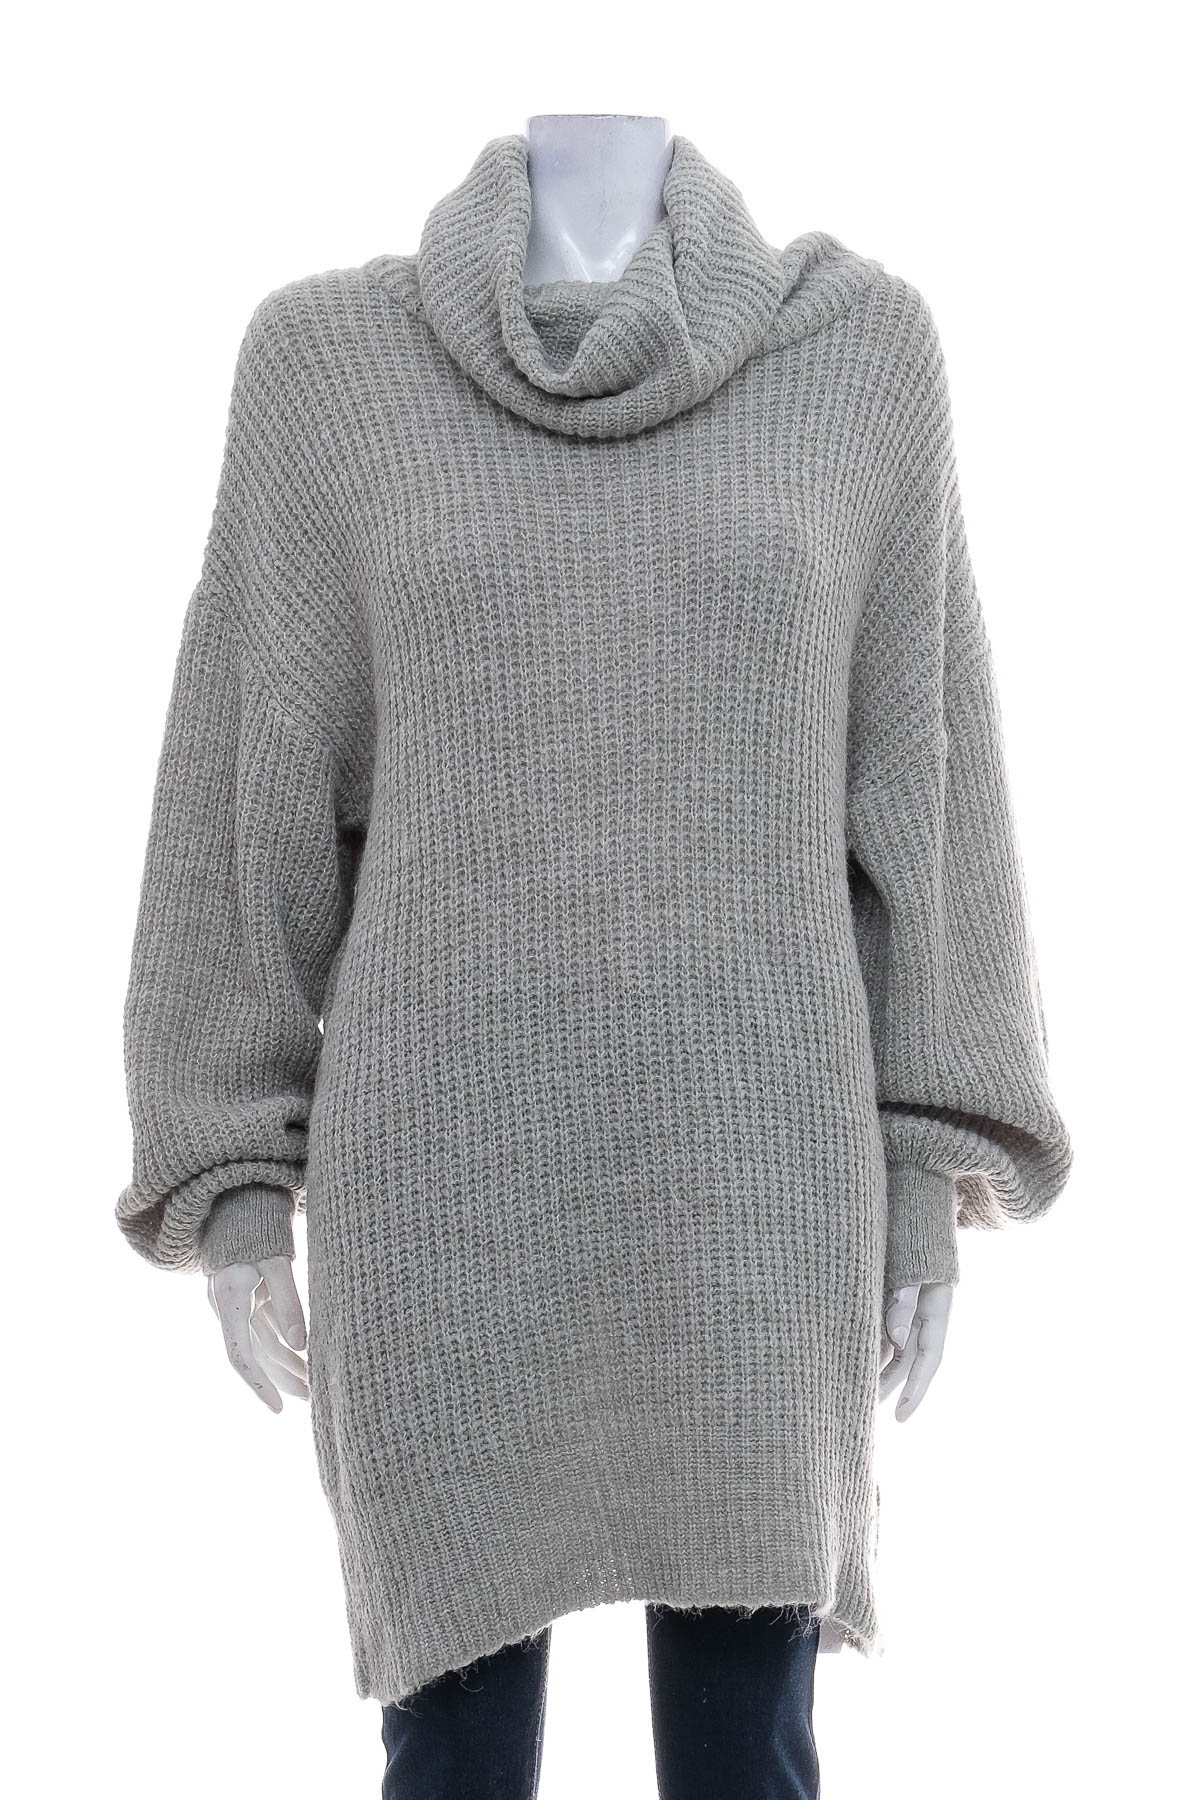 Women's sweater - LeGer by LENA GERCKE for ABOUT YOU - 0